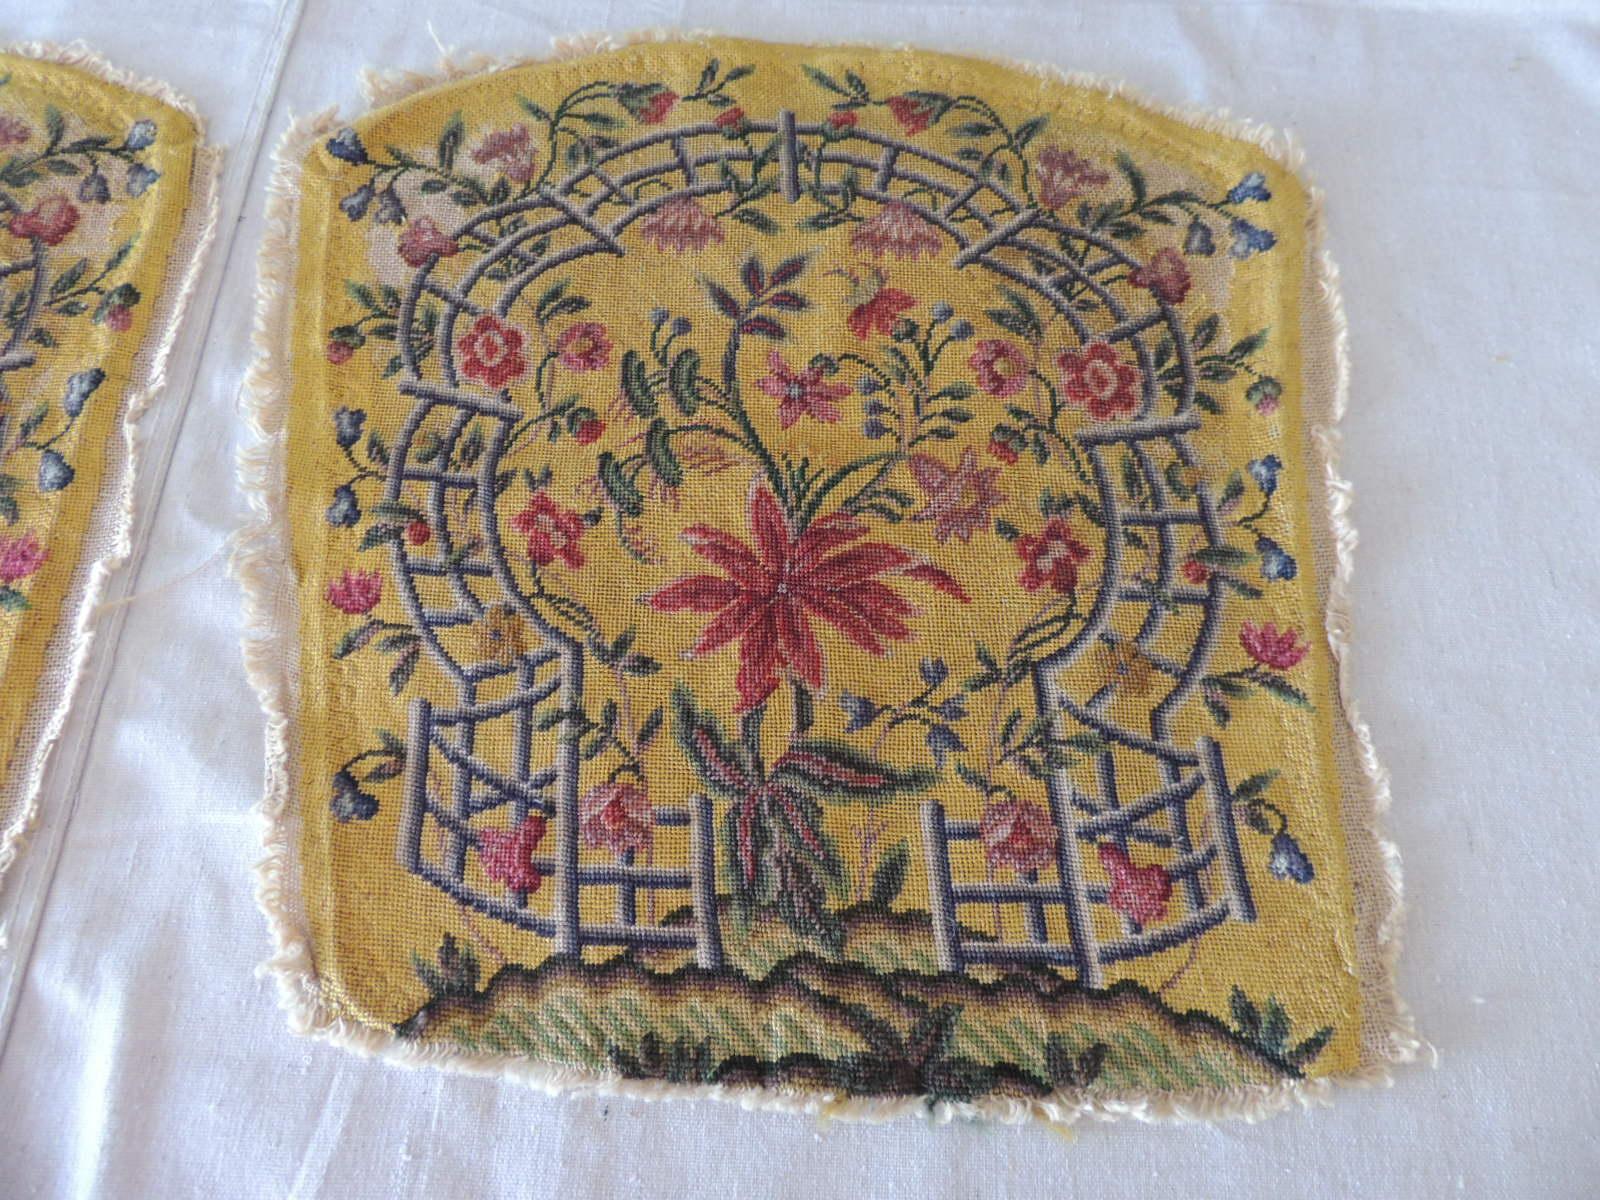 Pair of antique yellow and green petit point tapestry fragments.
Originally chair back covers.
Depicting arbor and tree of like pattern center.
In shades of yellow, green, red, orange, blue, pink and red.
Ideal for upholstery or pillows.
Size: